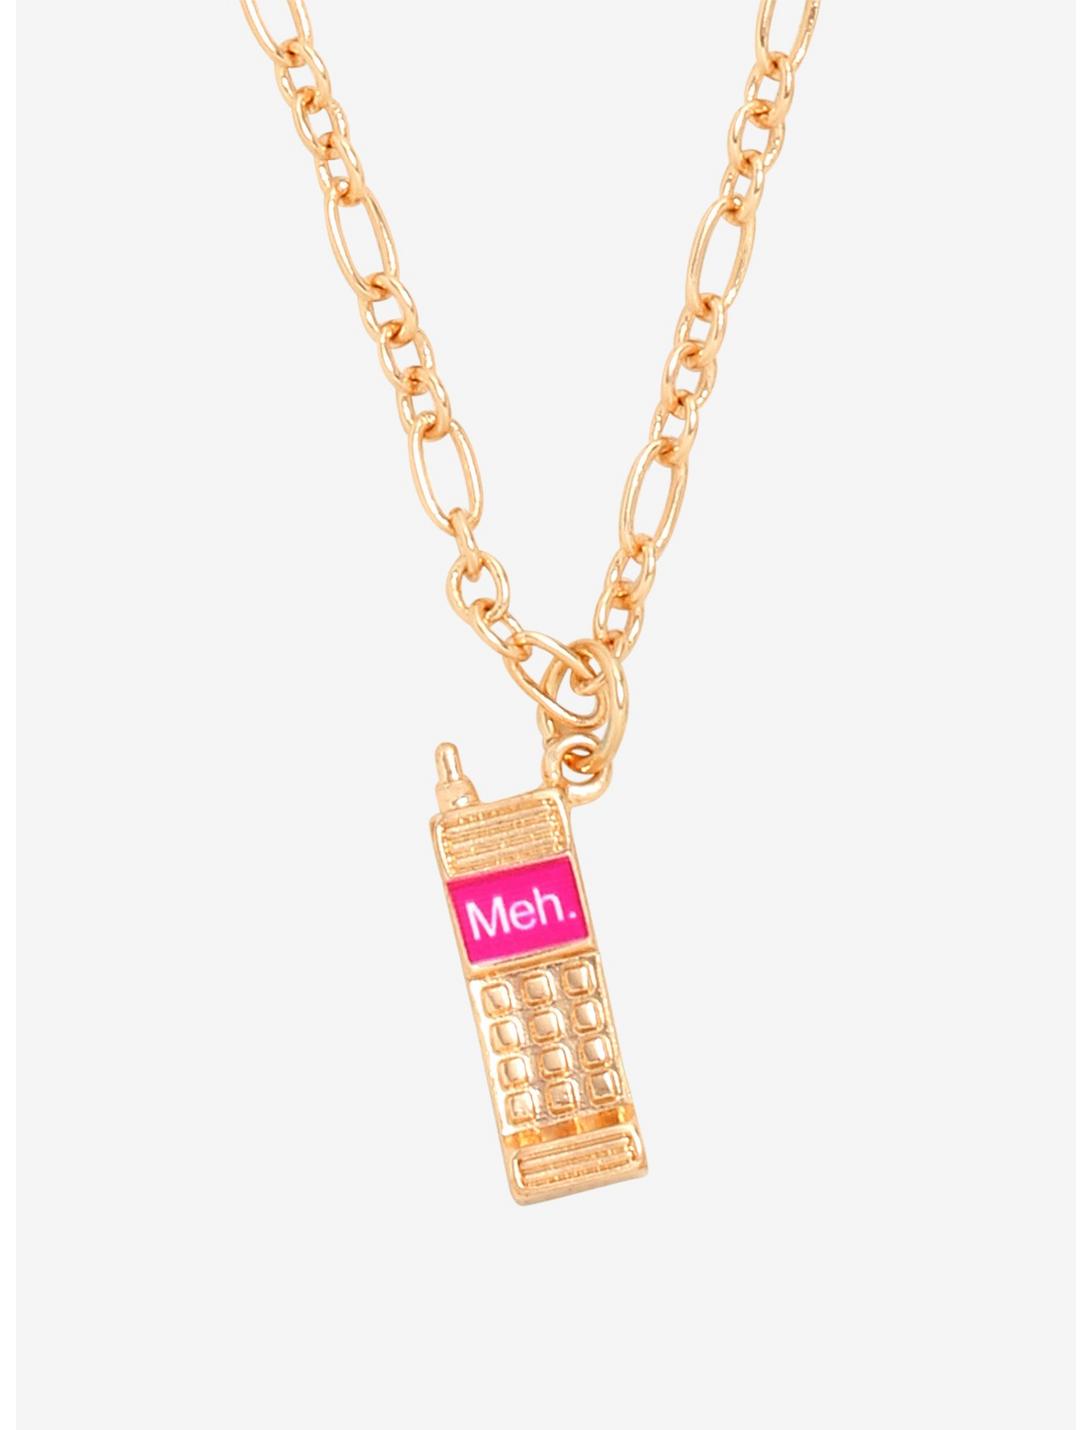 Cell Phone Meh Necklace, , hi-res